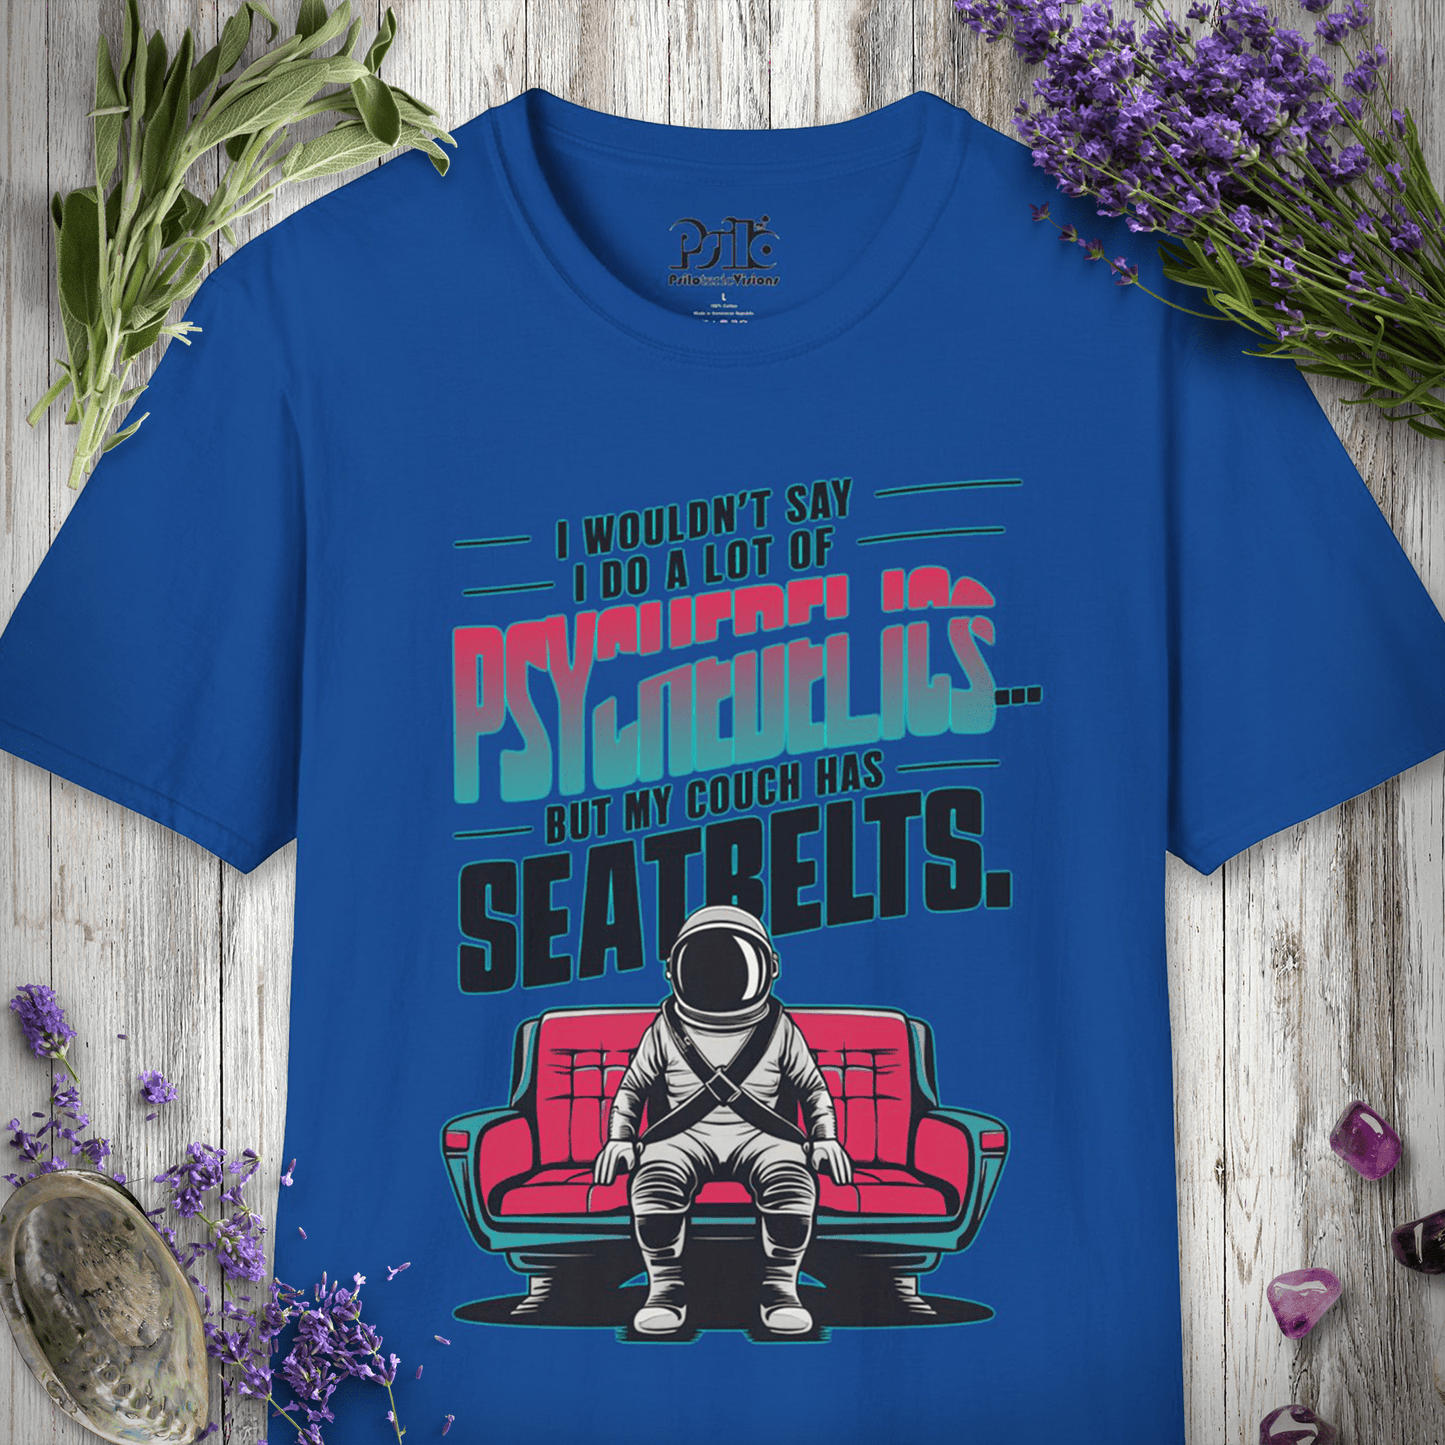 "I Wouldn't Say I Do A Lot of Psychedelics But My Couch Has Seatbelts" Unisex T-SHIRT